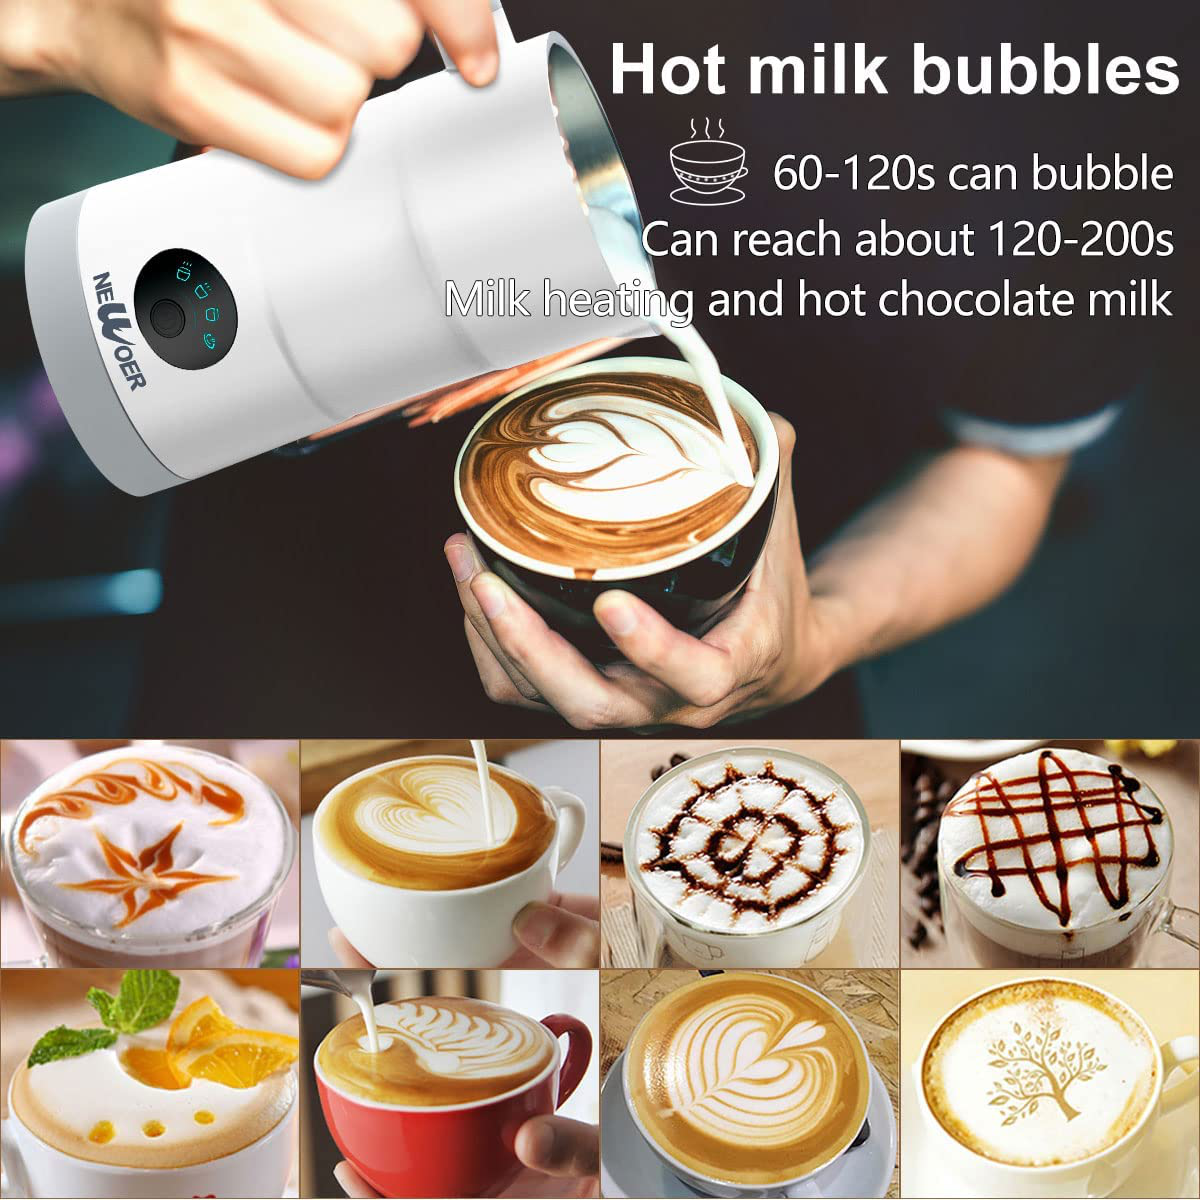 Electric Milk Frother and Steamer 4 in 1 Automatic Milk Warmer 400W Non- Stick Interior 580ml Hot/Cold Stainless Steel Milk Foam Maker for  Coffee/Hot Chocolate Milk/Latte/Cappuccinos 